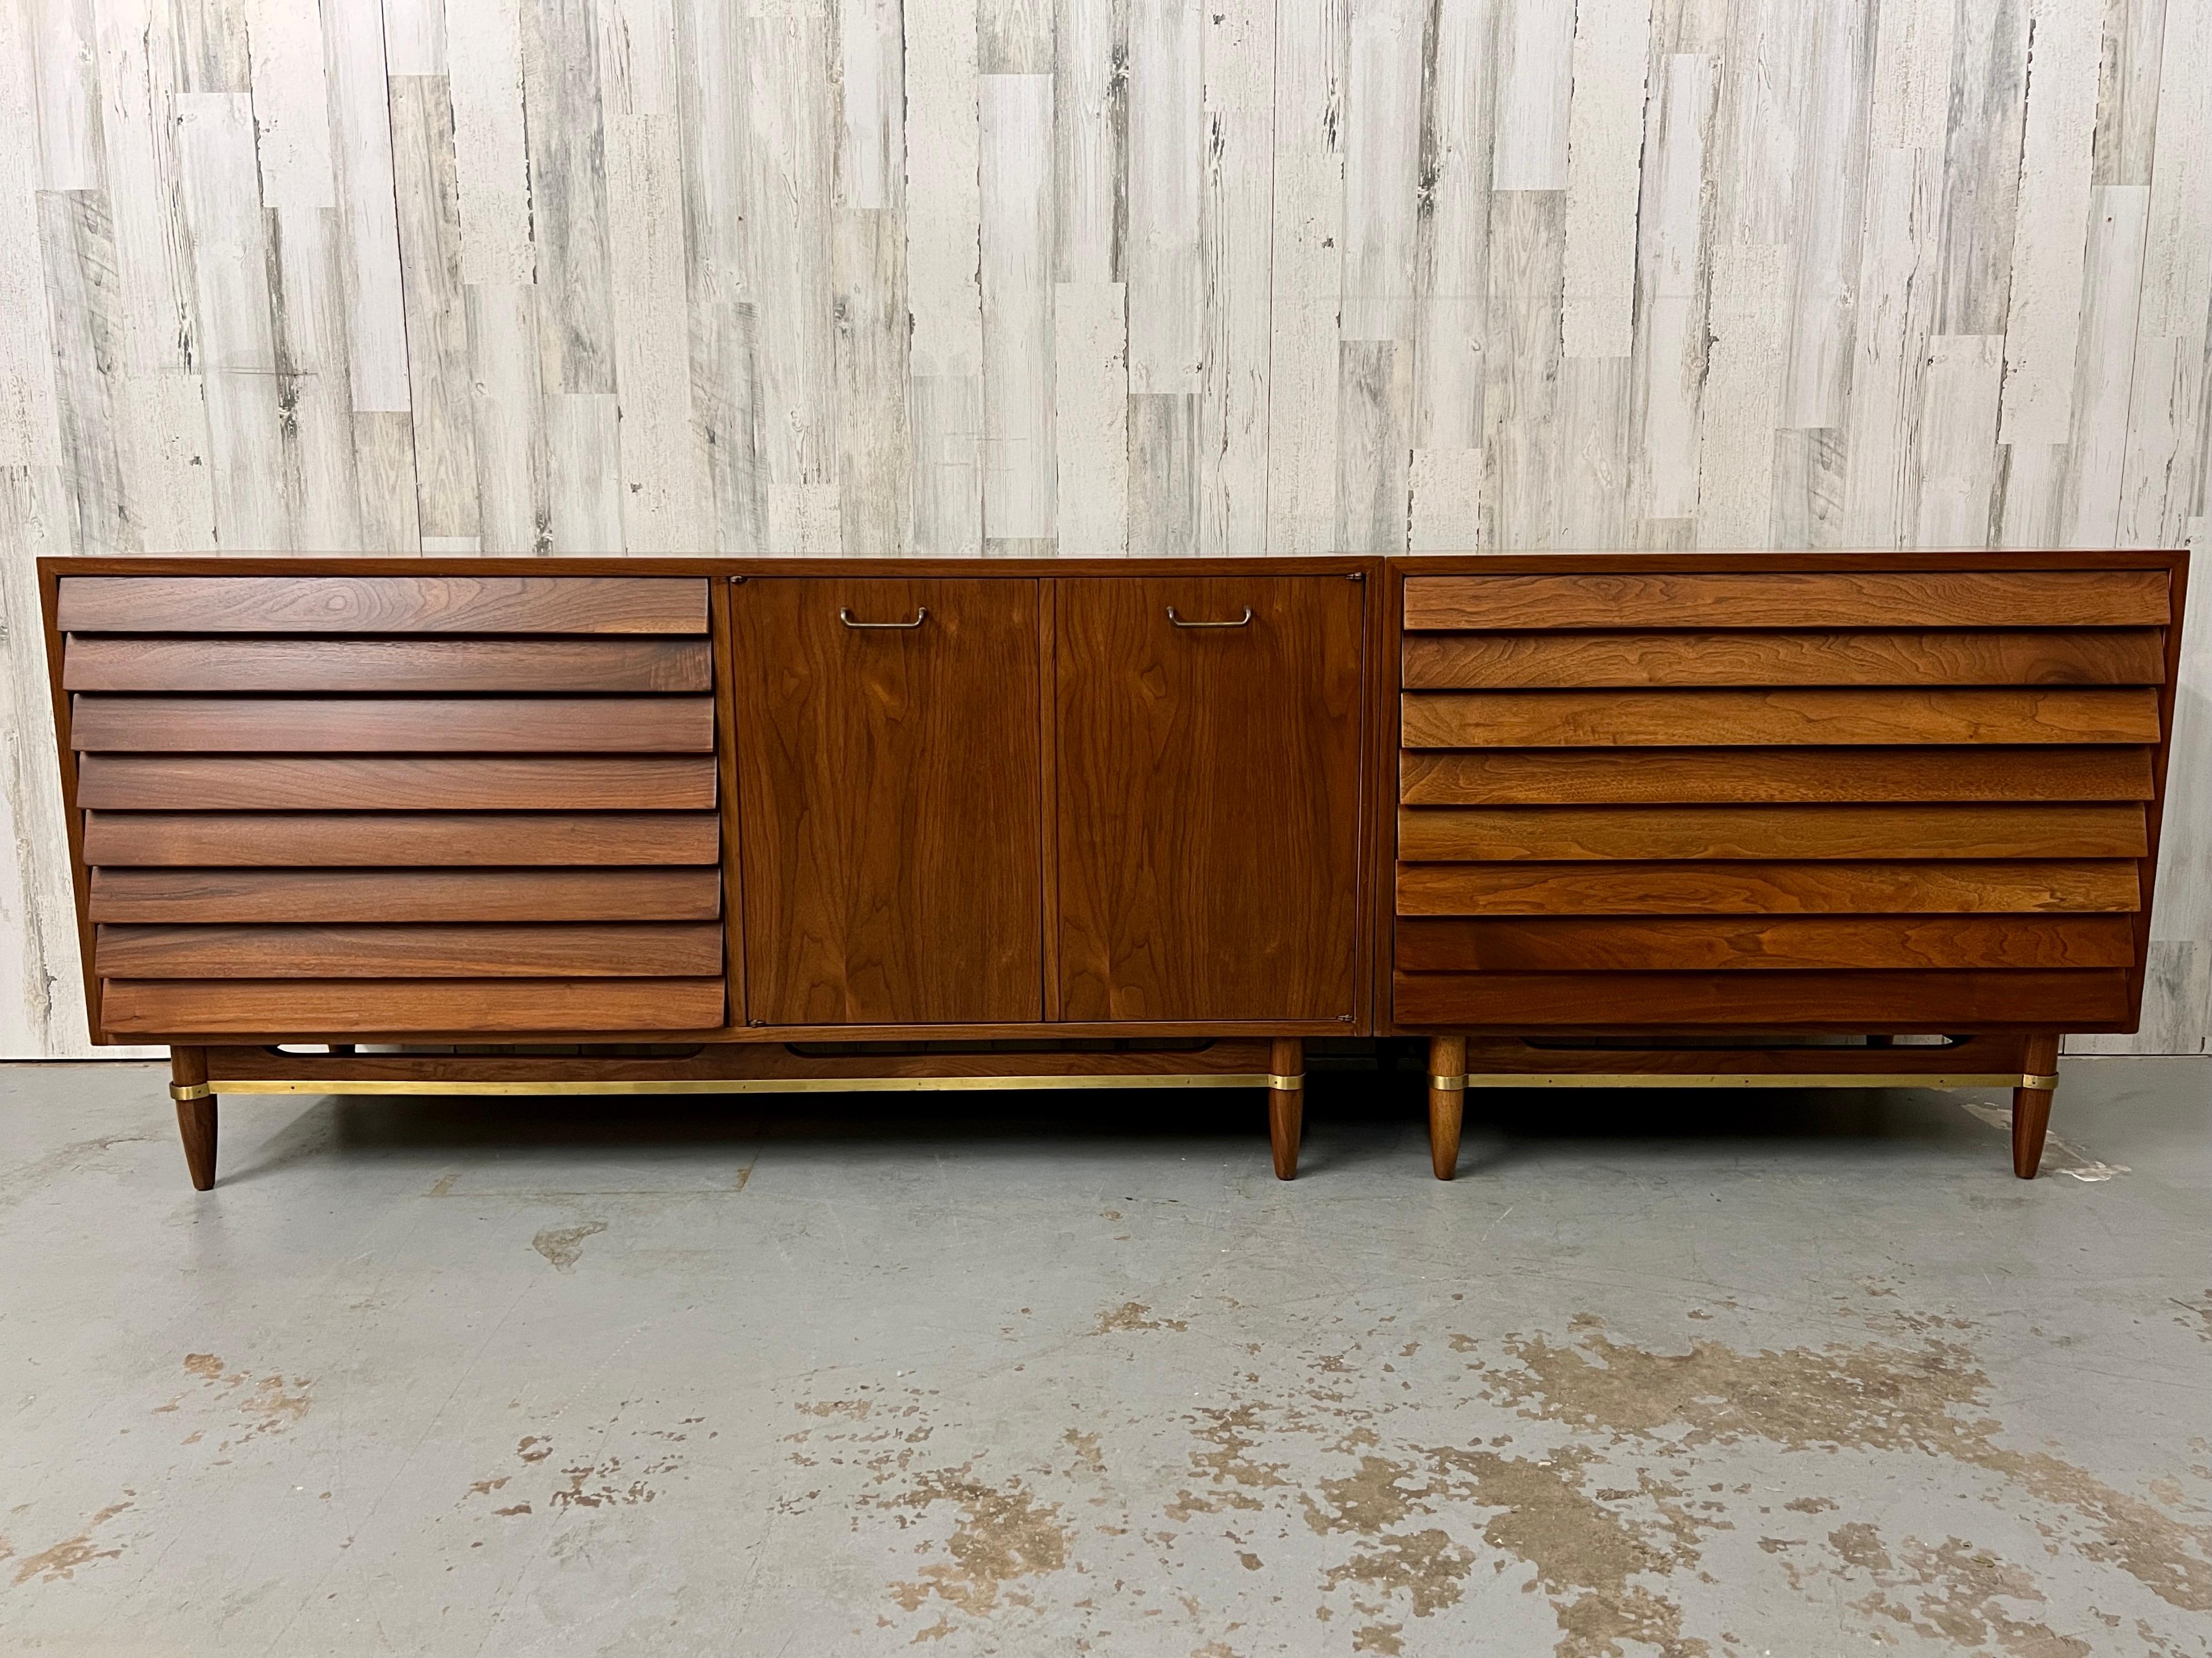 Rare two piece set  with louvered drawers on each side and additional drawers inside the center doors, Satin finish on the walnut really brings out the deep walnut tone.
These two cabinets can be used together or seperate.
Large cabinet 60 wide x